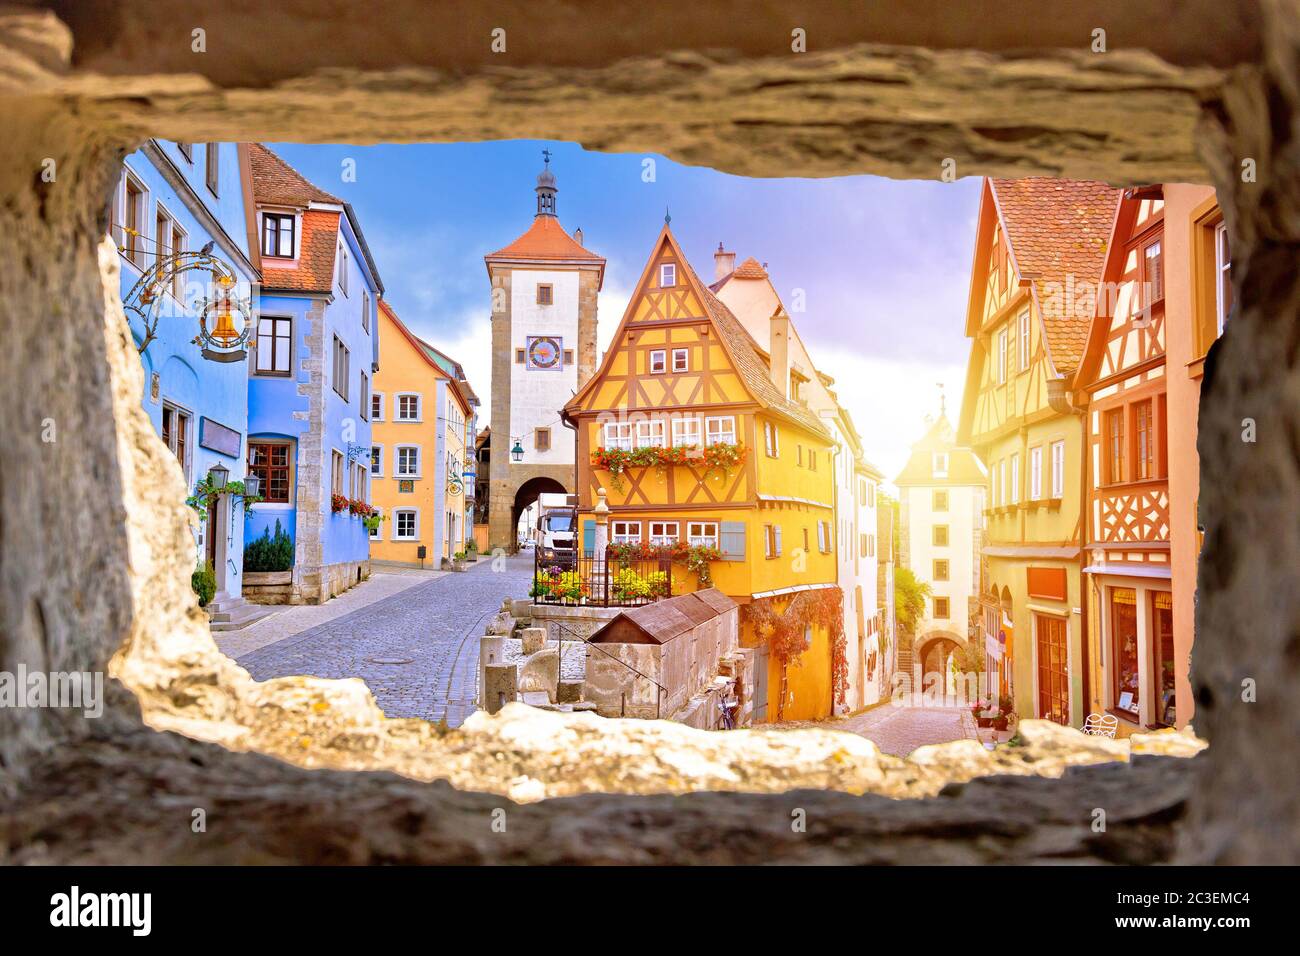 Cobbled street and architecture of historic town of Rothenburg ob der Tauber view through stone window Stock Photo